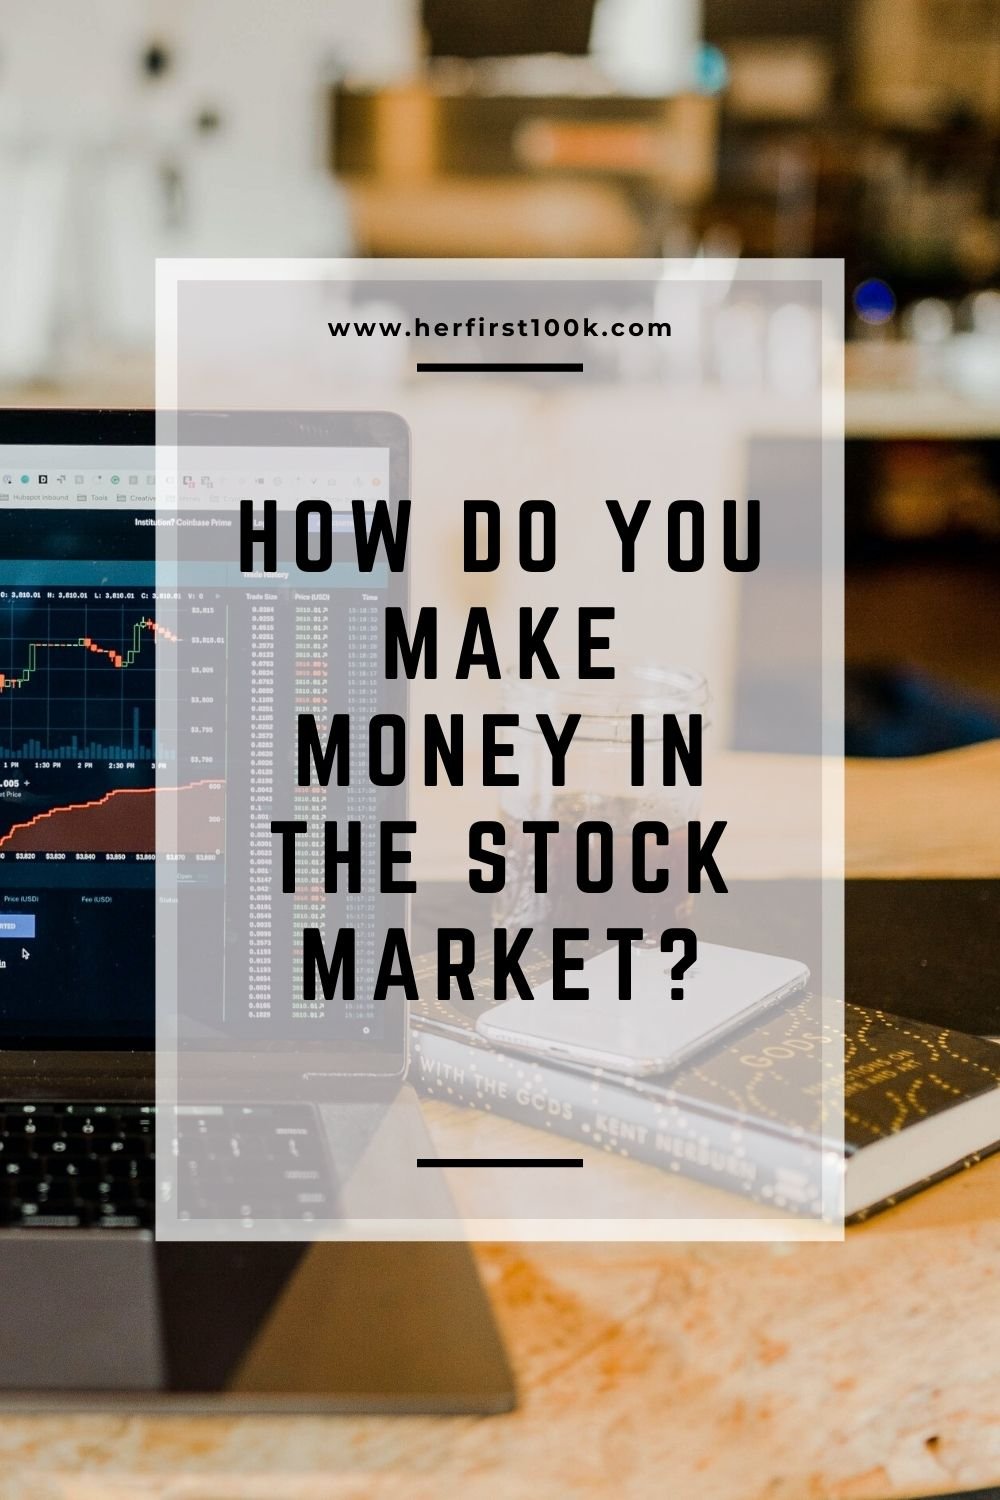 Image of a computer open to stock market ticker with notebook and iphone laying next to it. Overlay text says "HOW DO I MAKE MONEY IN THE STOCK MARKET?"